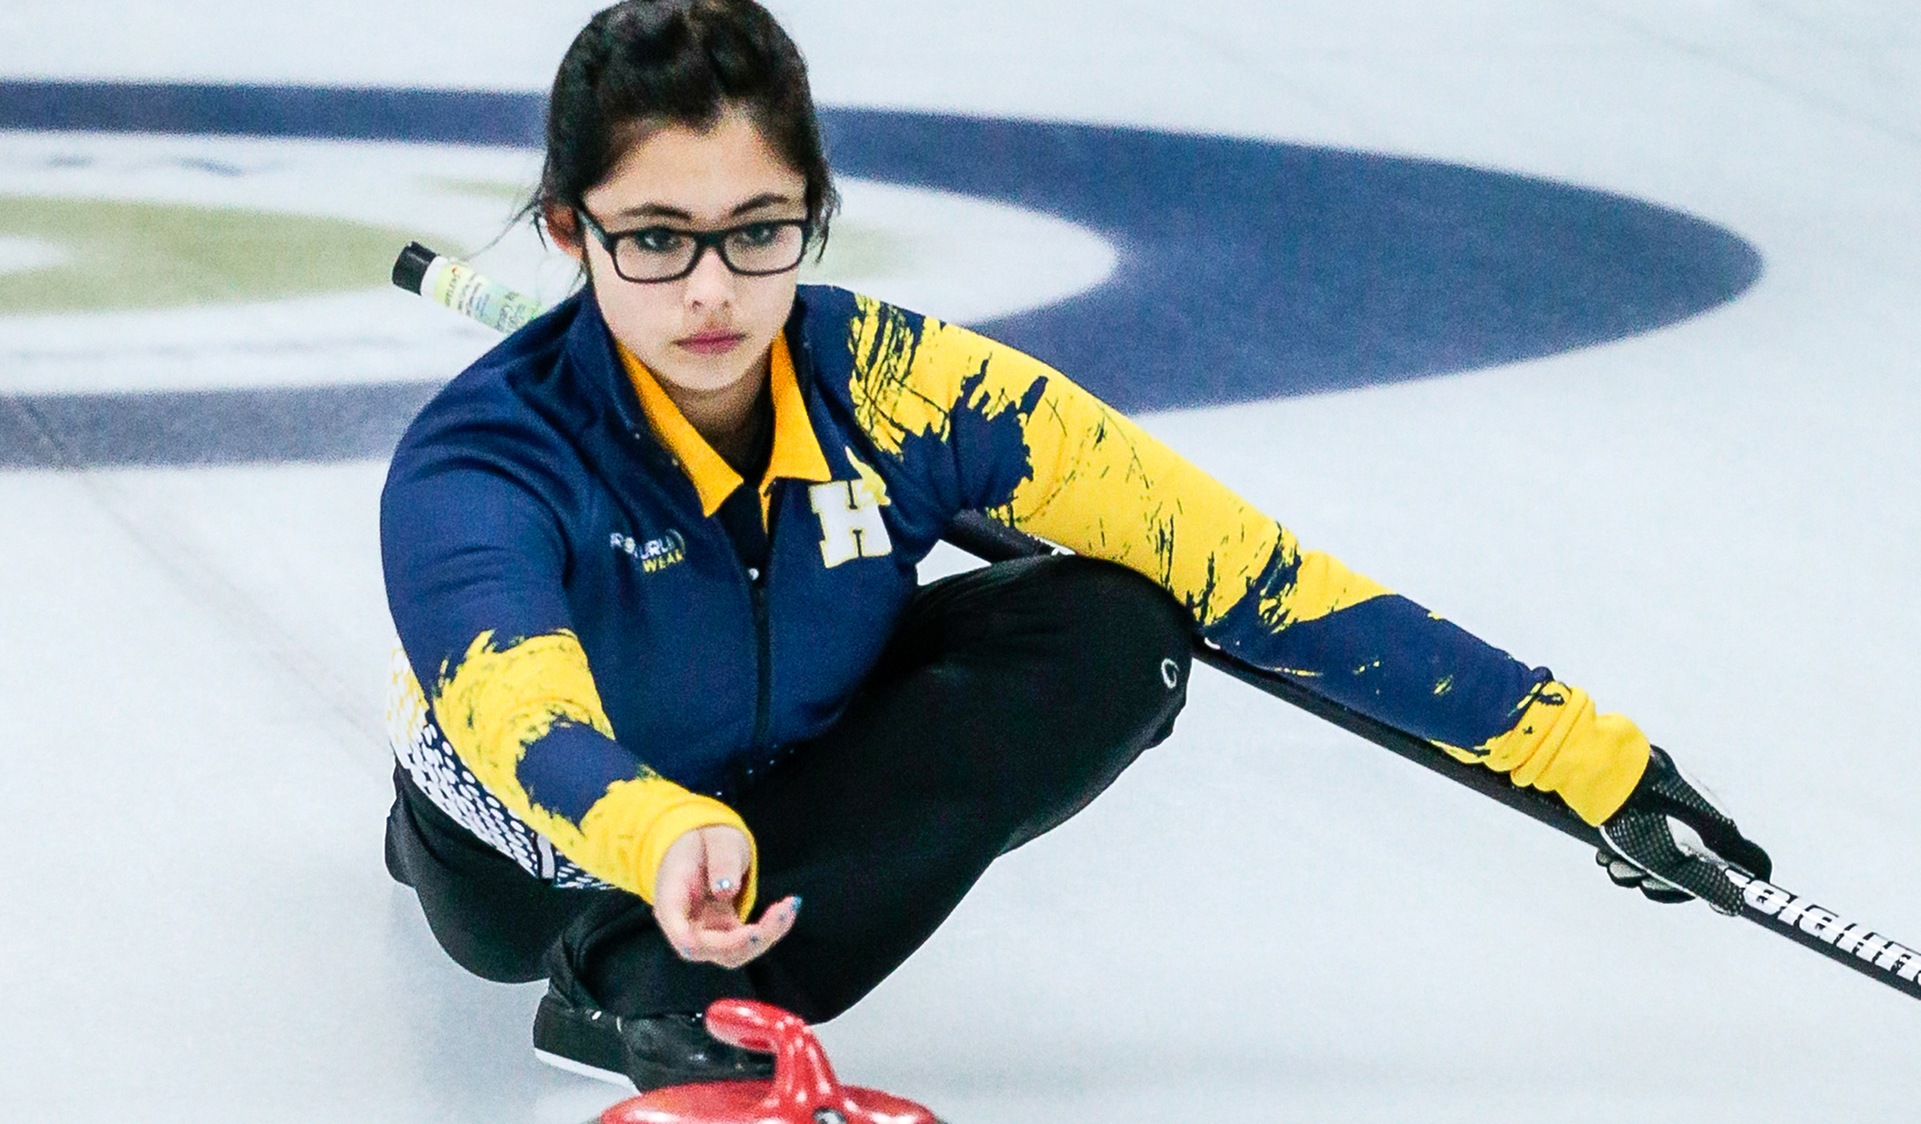 HAWKS TO HOST HUMBER CUP CURLING BONSPIEL